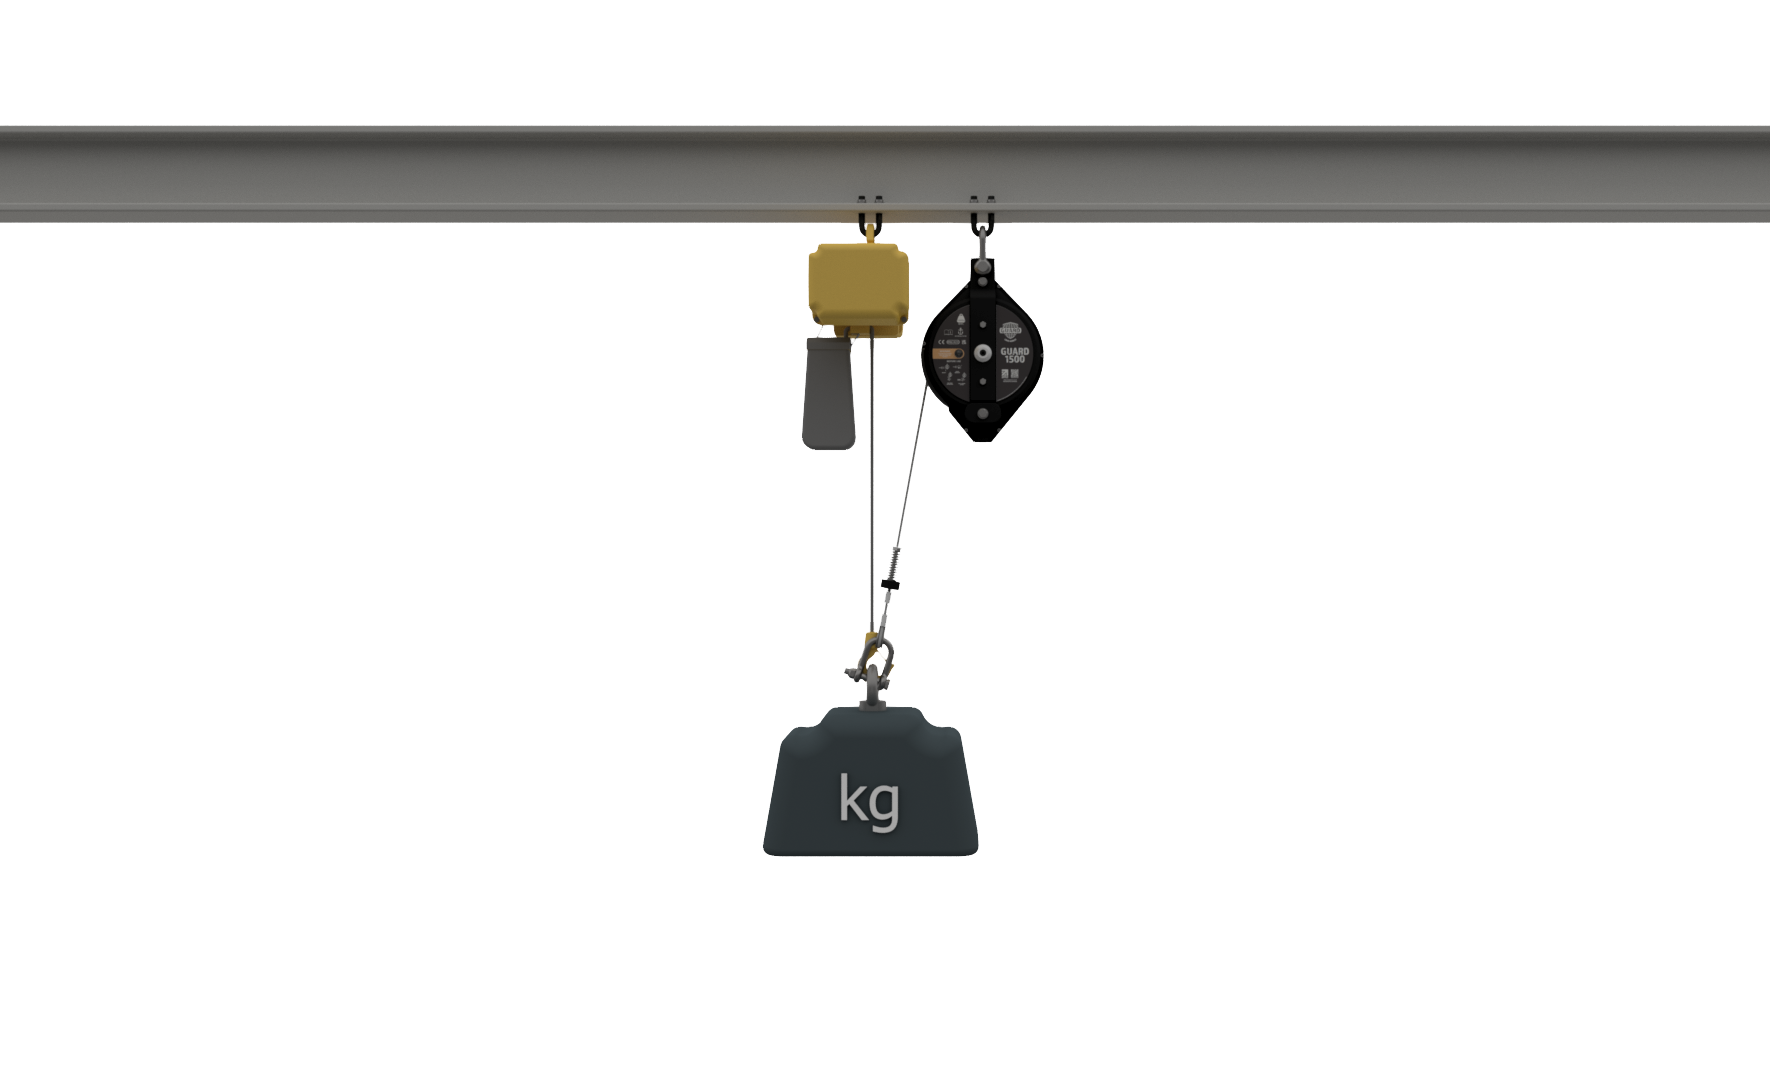 load securing devices with a chain hoist